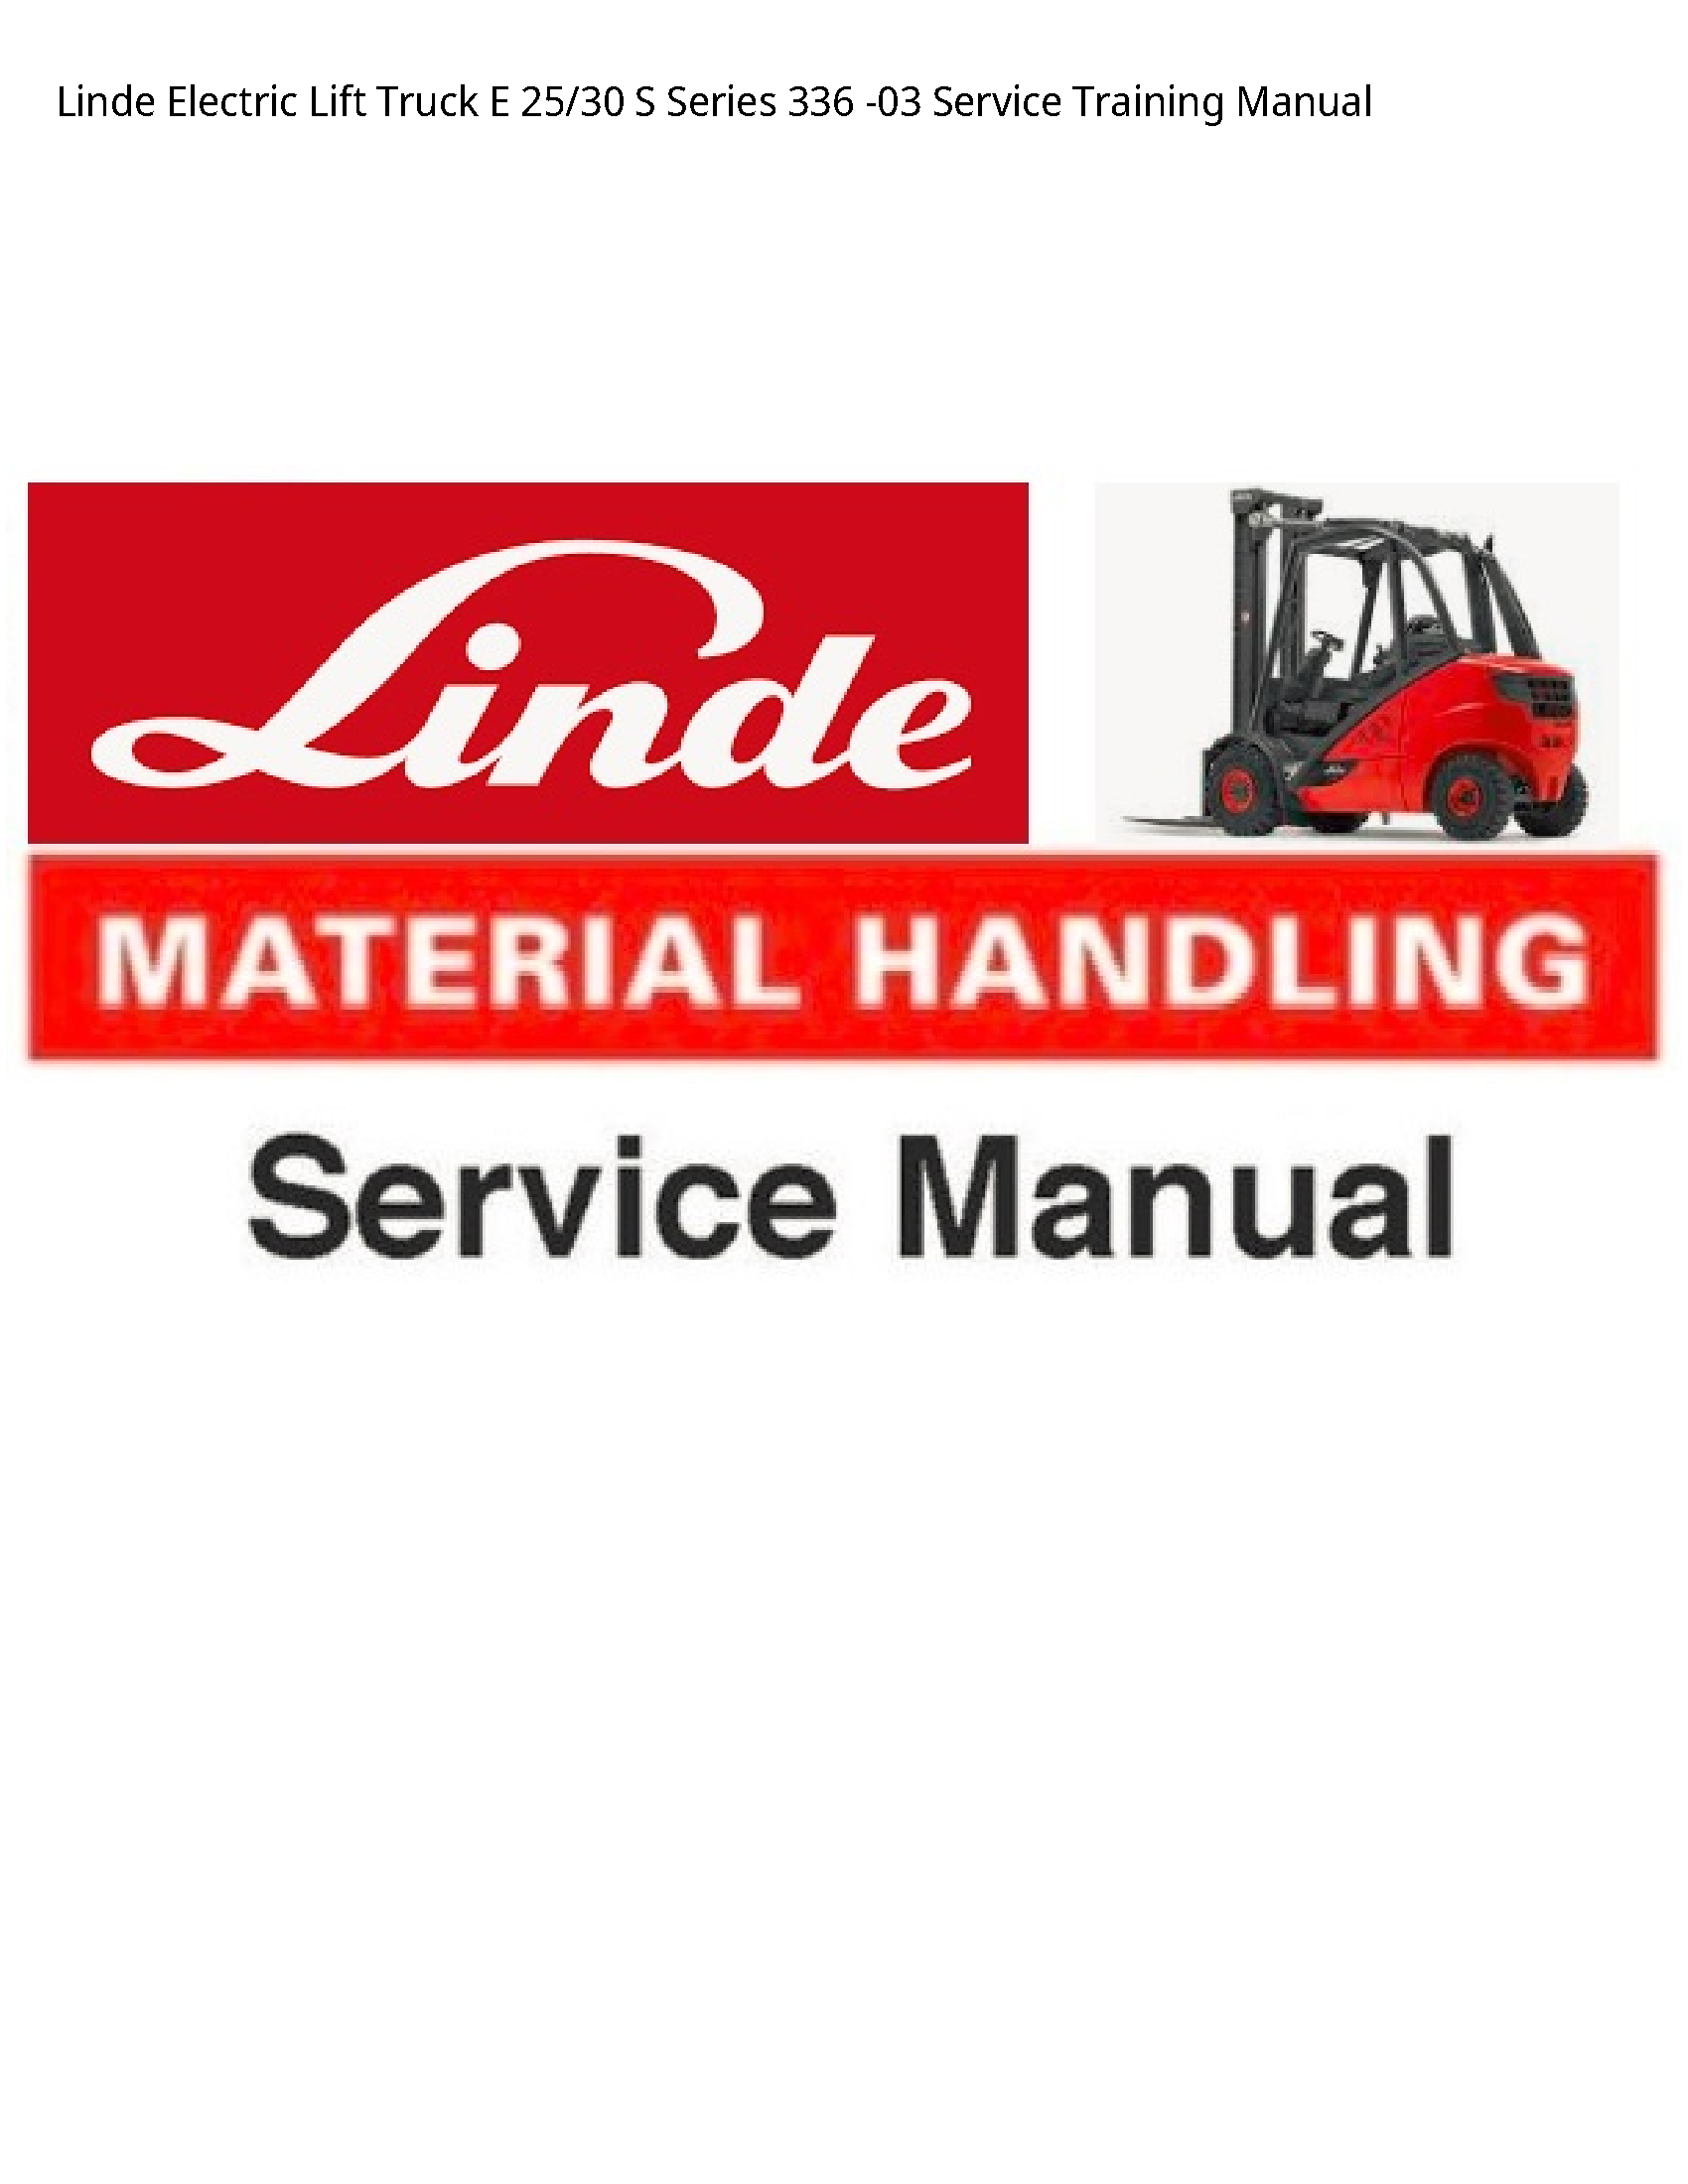 Linde 25 Electric Lift Truck Series Service Training manual